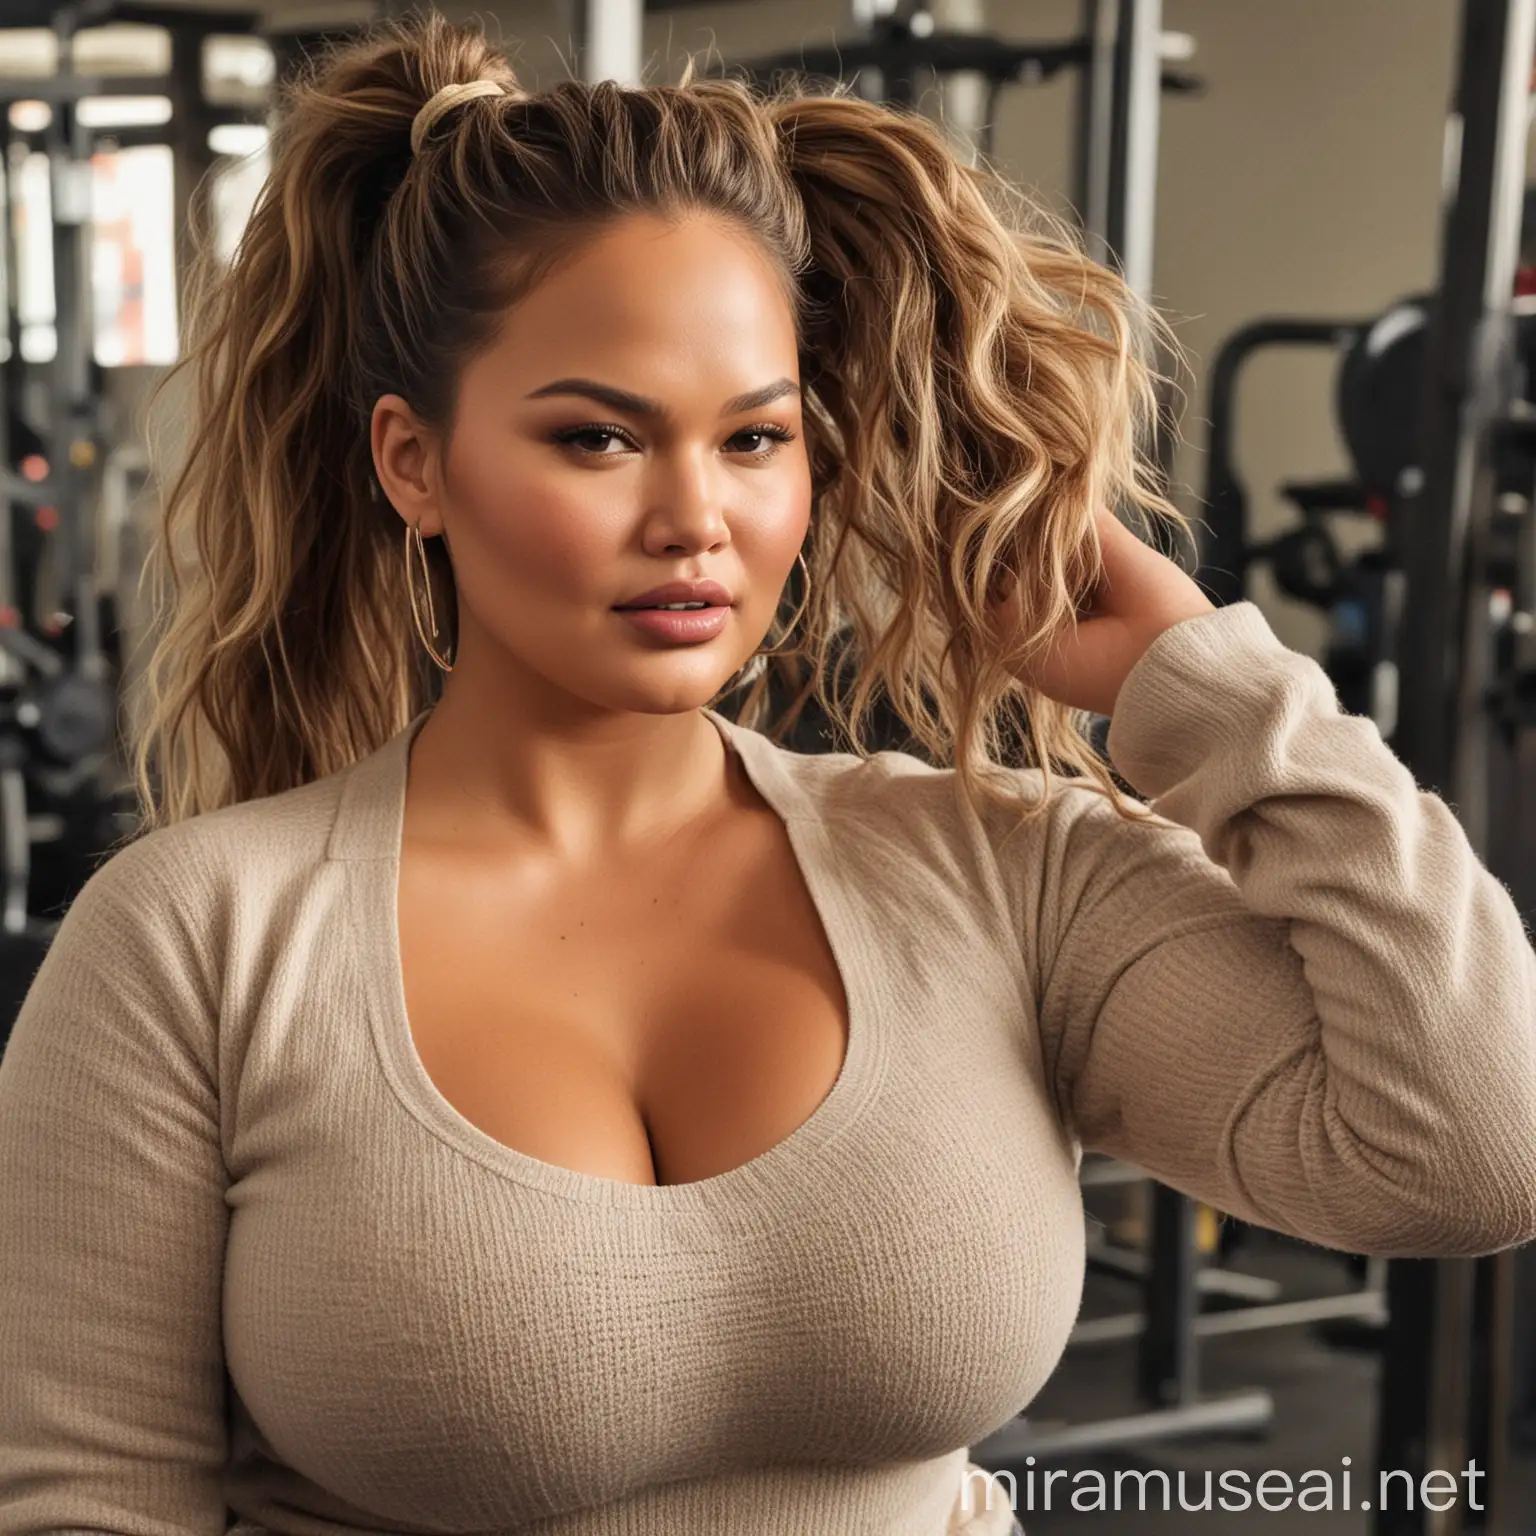 Chrissy Teigen in the gym, wearing a tight sweater, bbw, big long kinky hair in a ponytail, showing massive cleavage, giant breasts